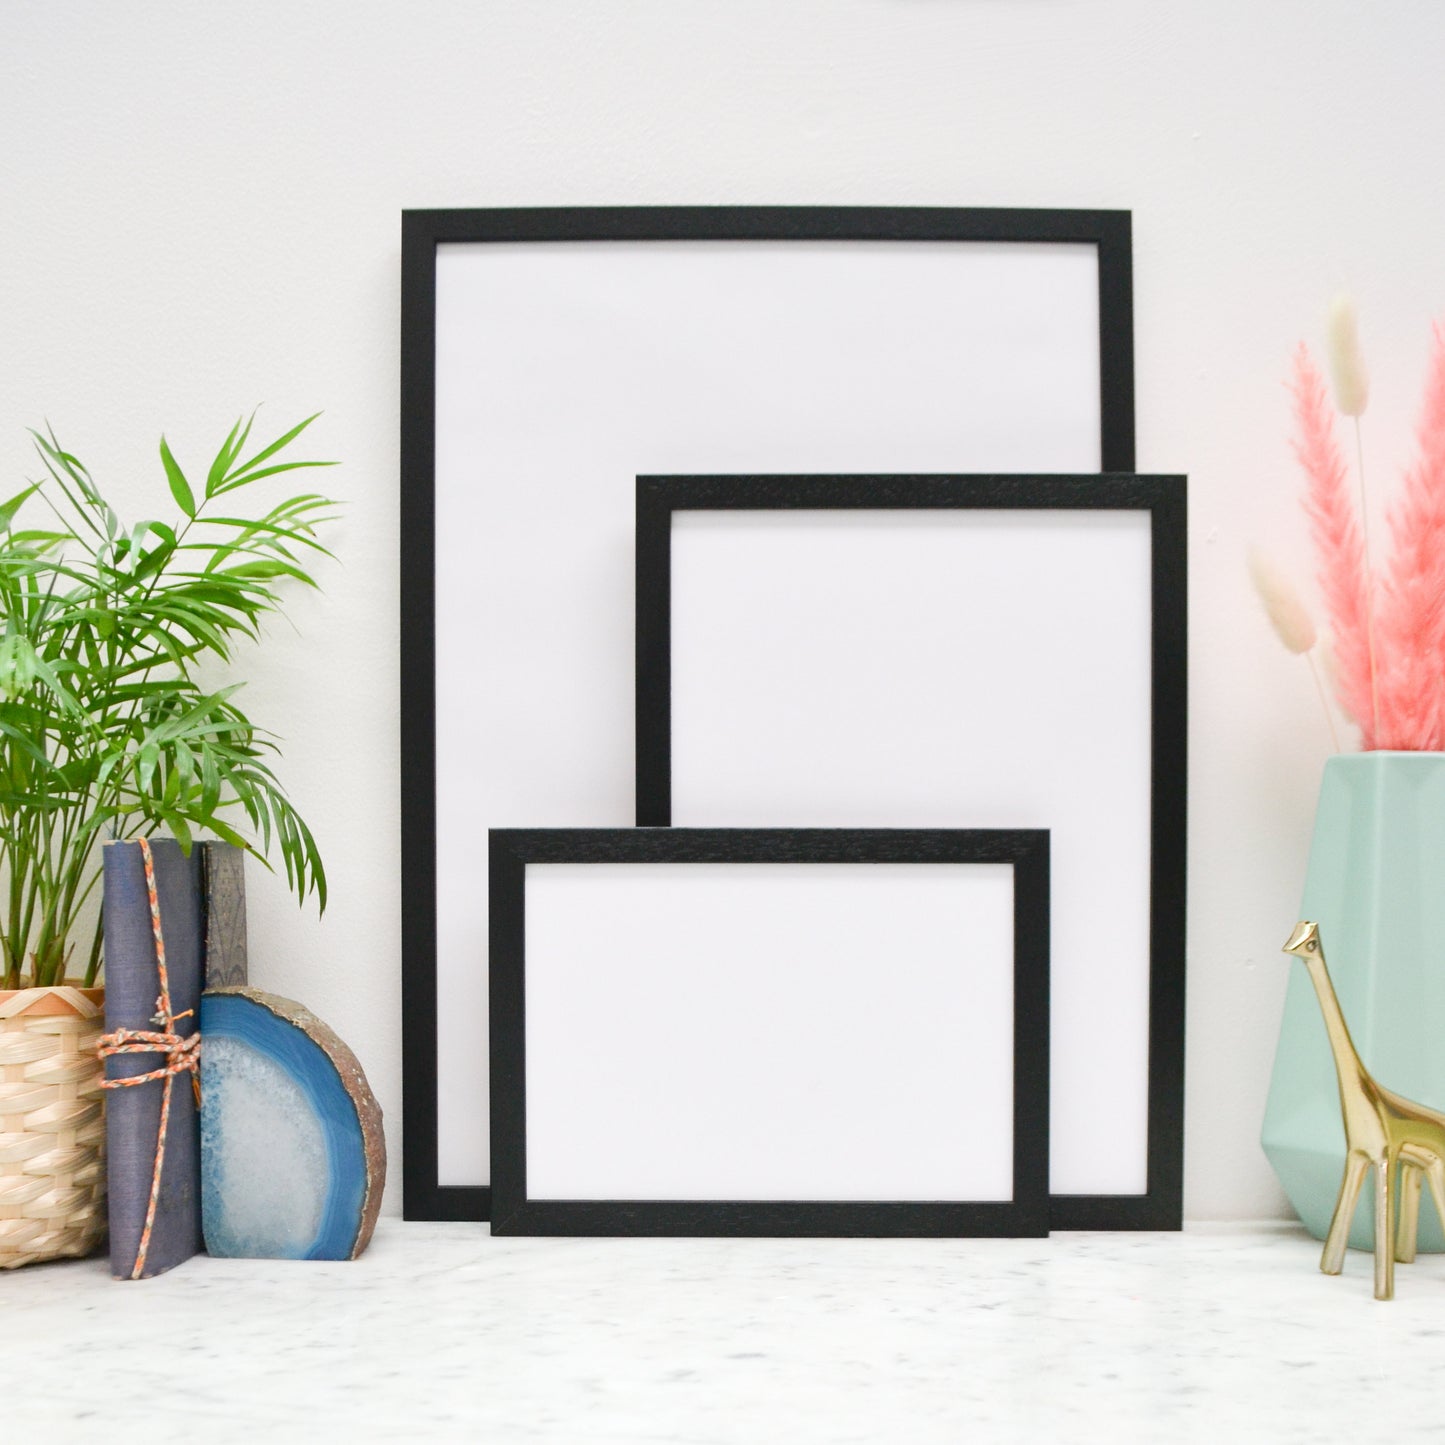 Print and Frame Anything Framed Print, Print your own Artwork, poster or photos Custom printing Service, custom image in frame art print